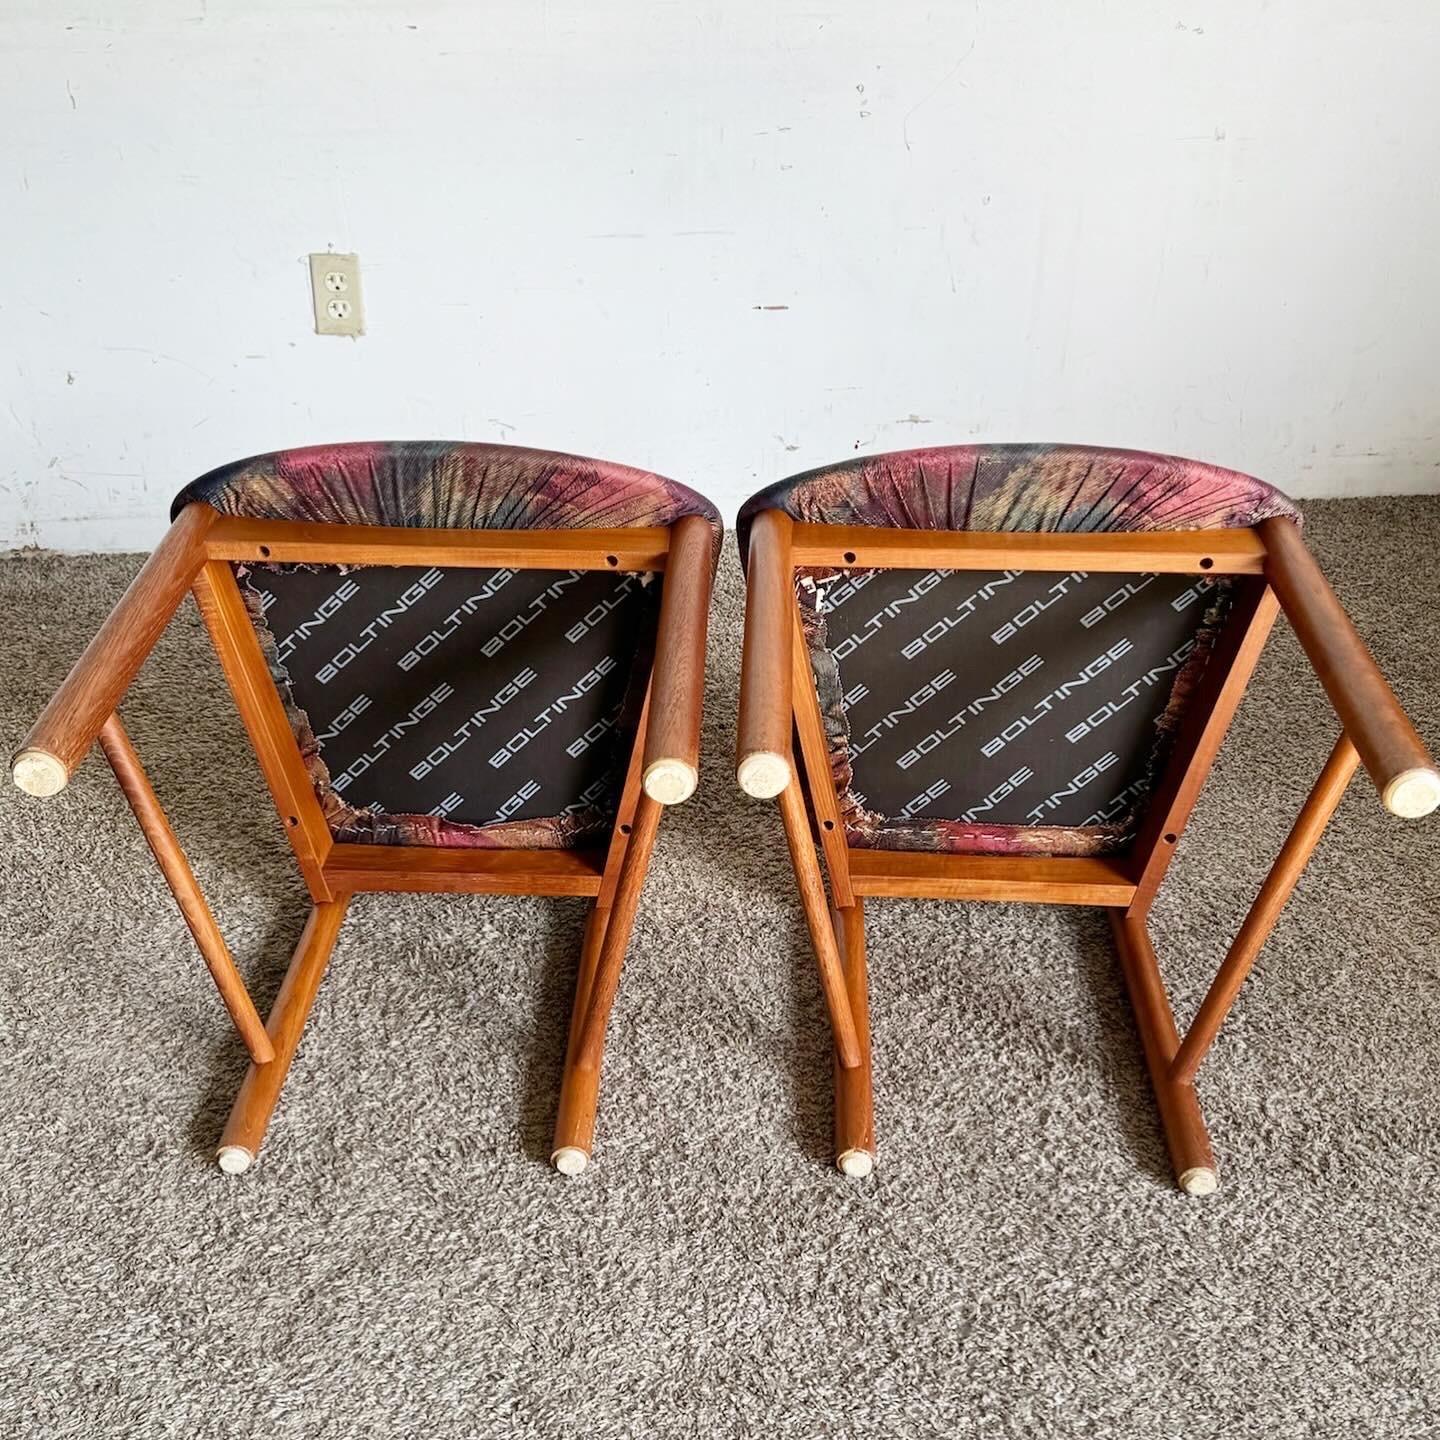 Danish Mid Century Modern Dining Chairs by Boltinge - Set of 4 For Sale 4